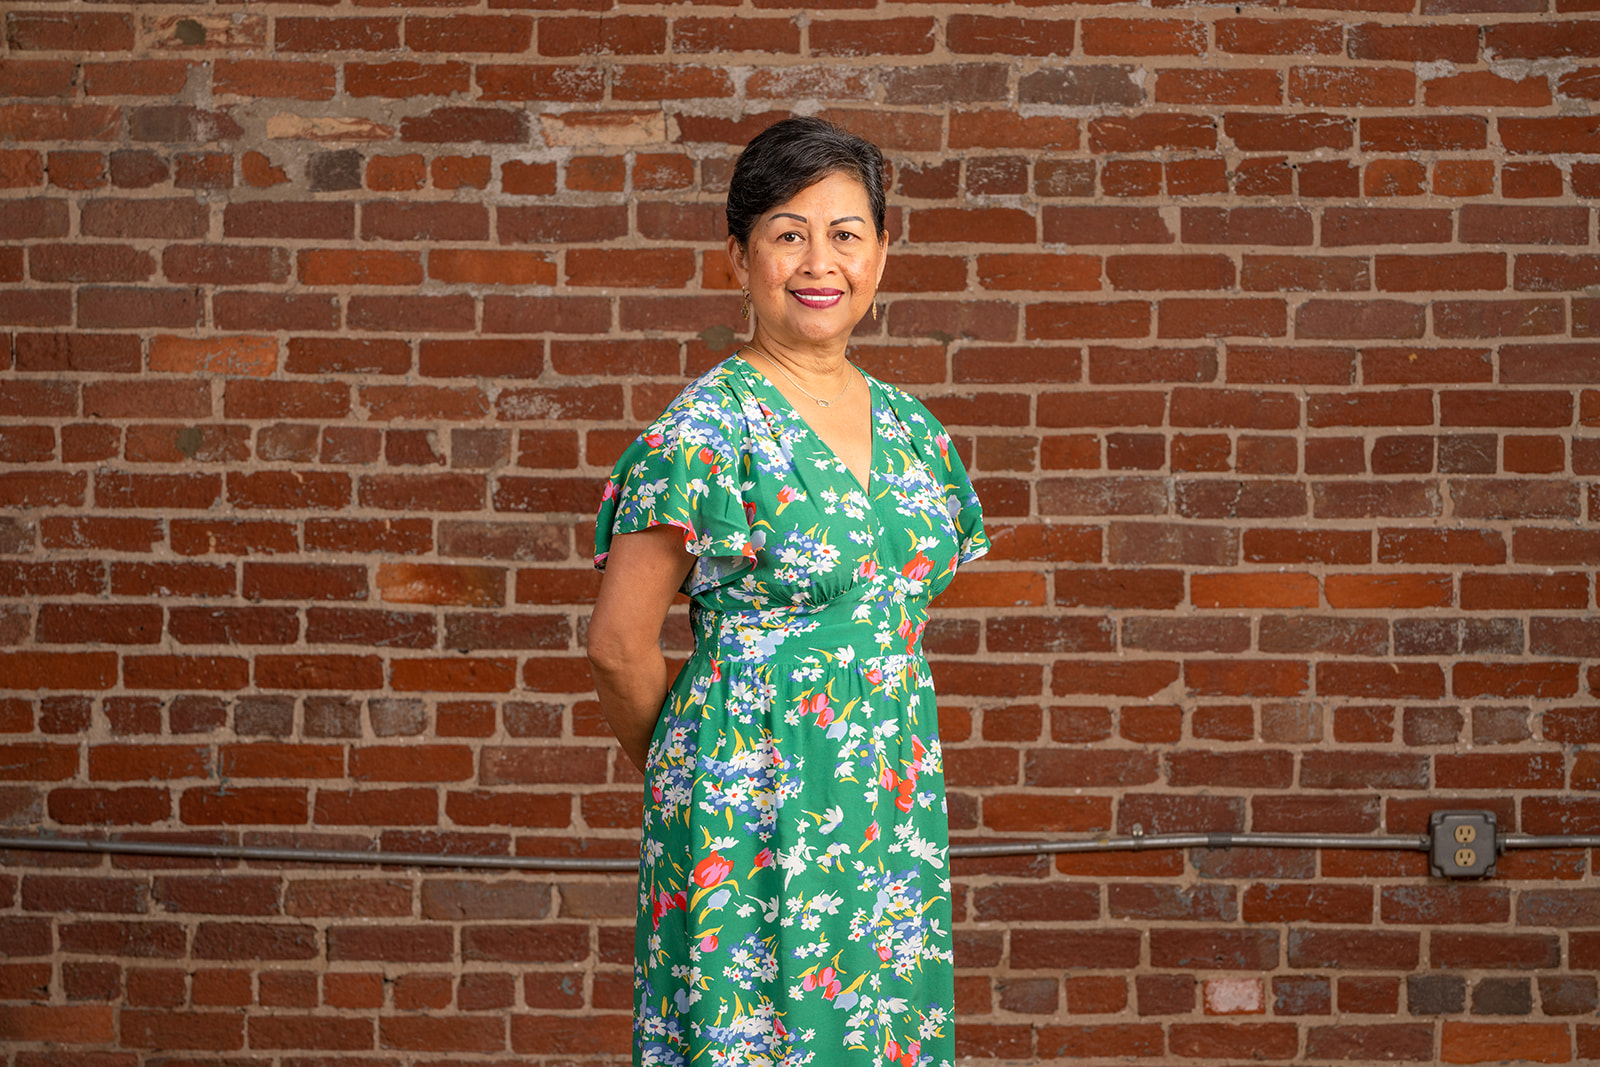 Team member Gloria, standing in front of a red brick wall.